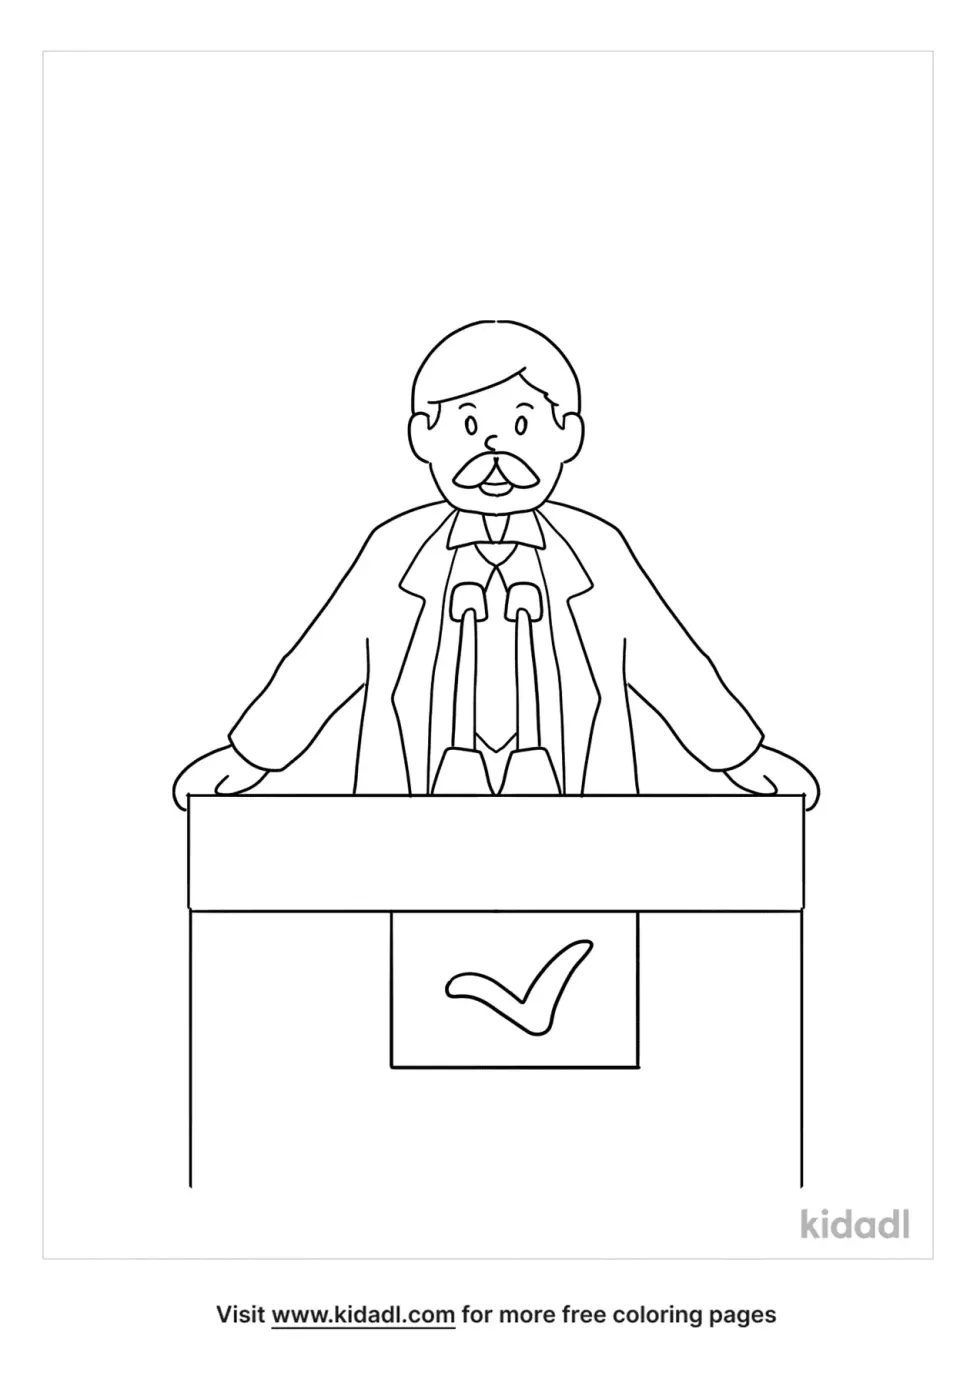 Politician Coloring Page